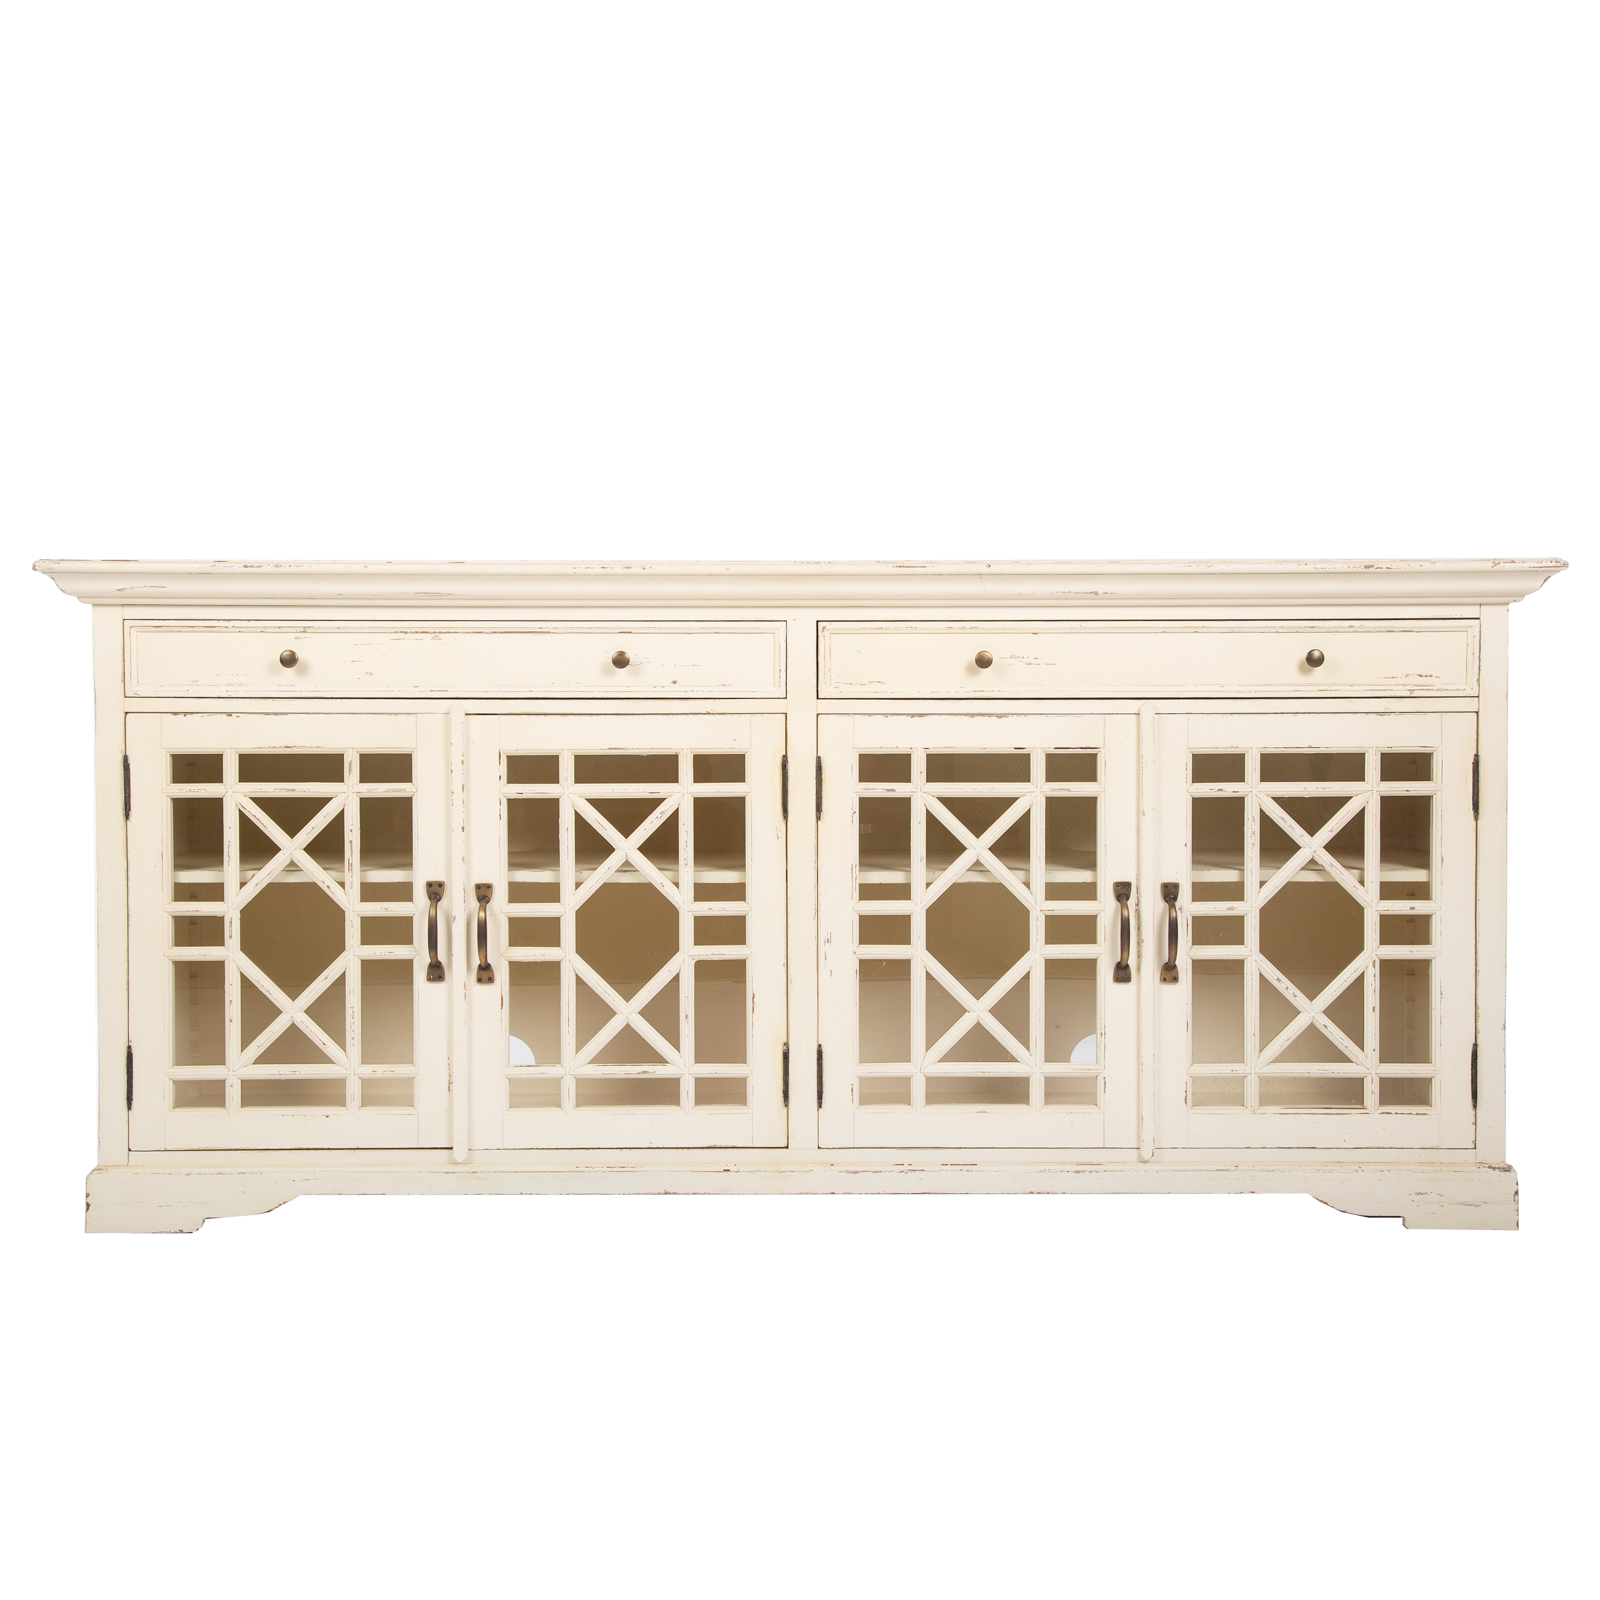 ARHAUS CONTEMPORARY PAINTED WOOD 36943d